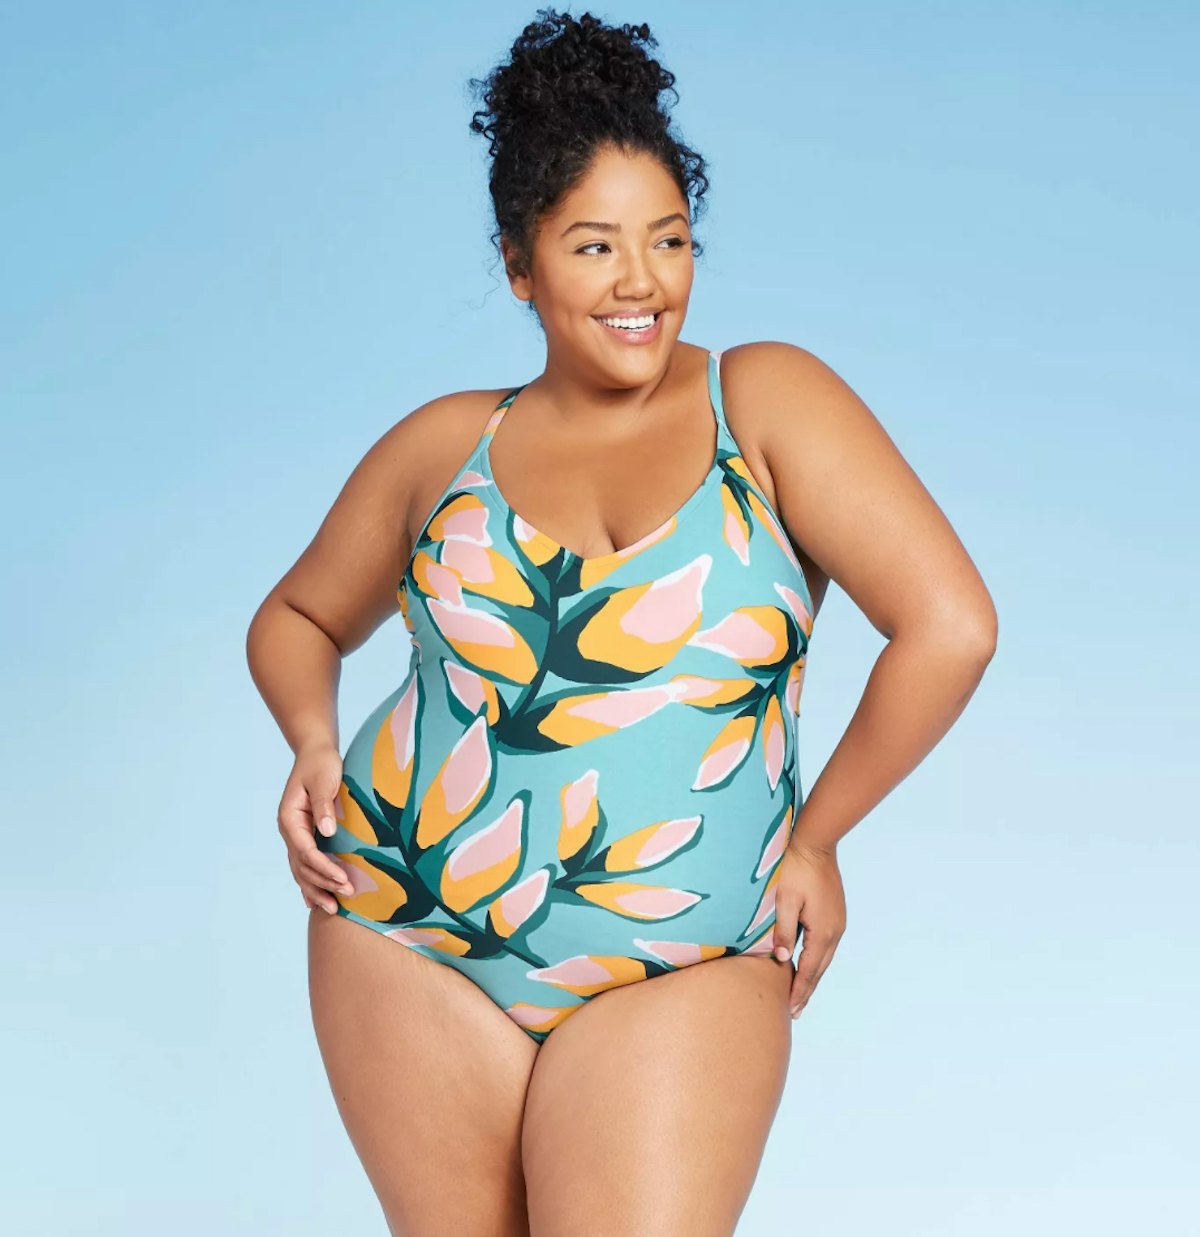 12 Plus Size Fashion Brands To Try In 2020 That Won T Break The Bank